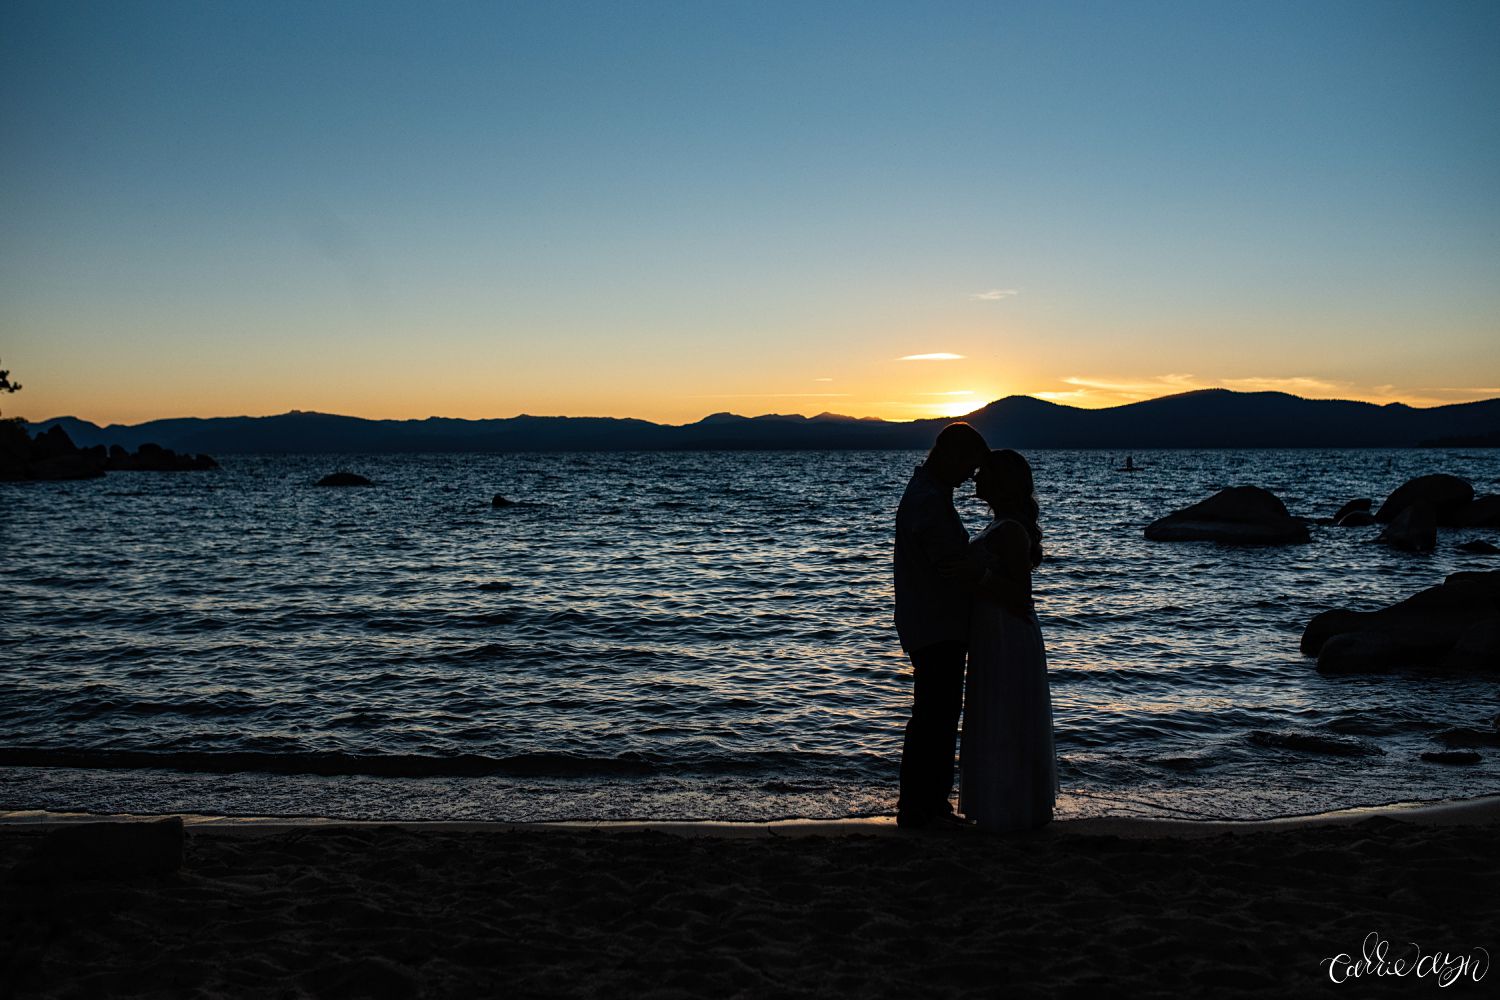 A Sand Harbor in Lake Tahoe Engagement Session